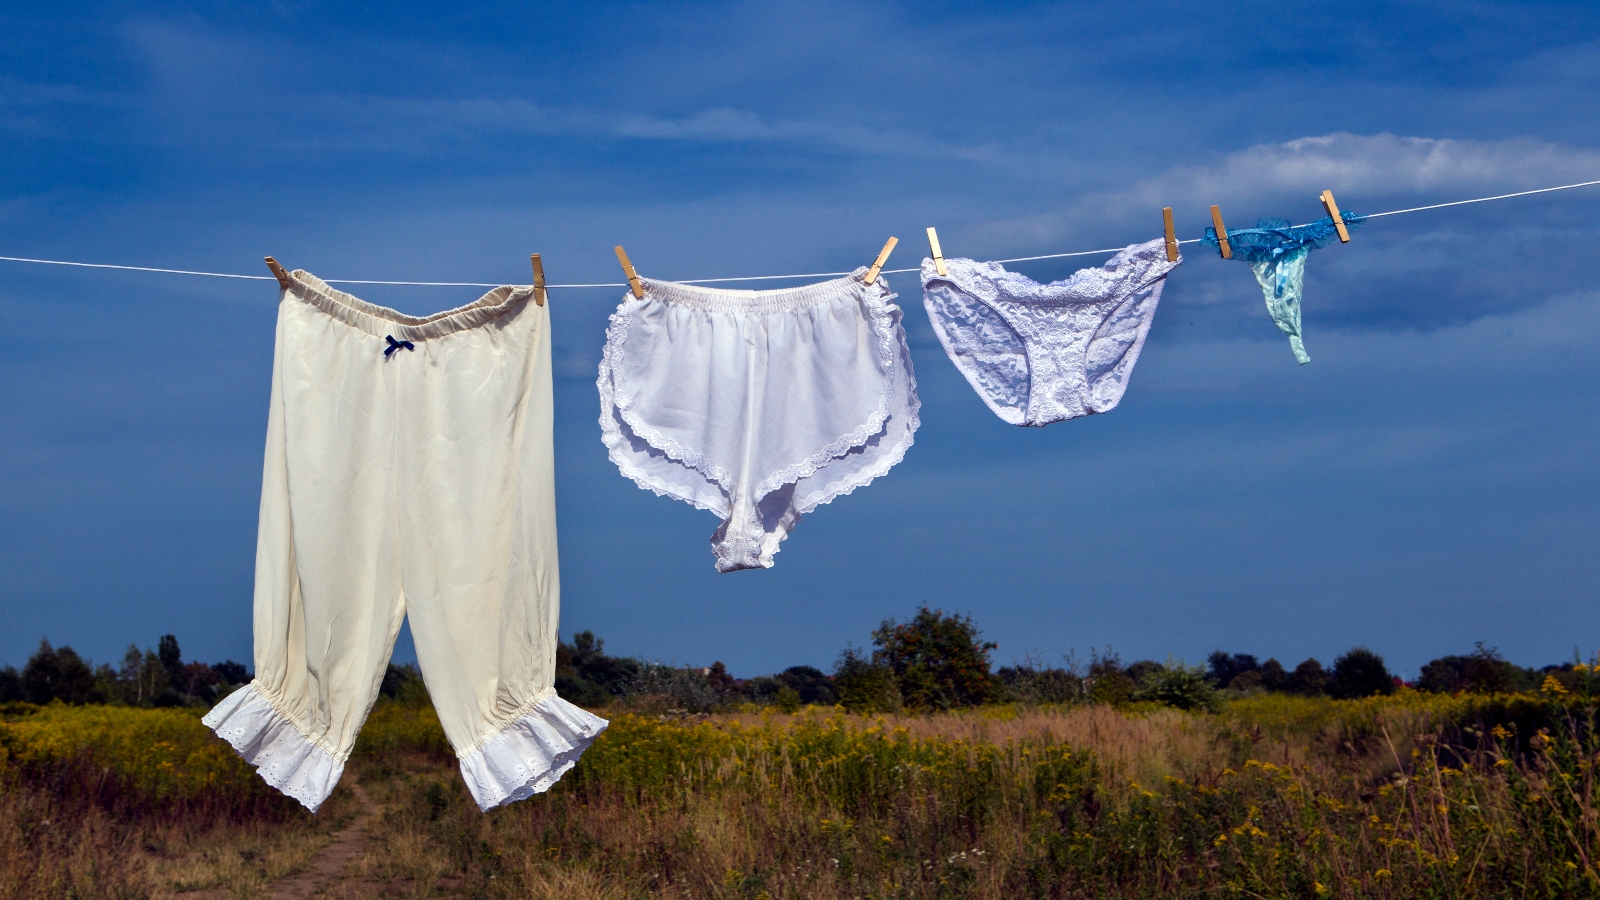 Why there's an 'odd pocket' in the crotch of your knickers